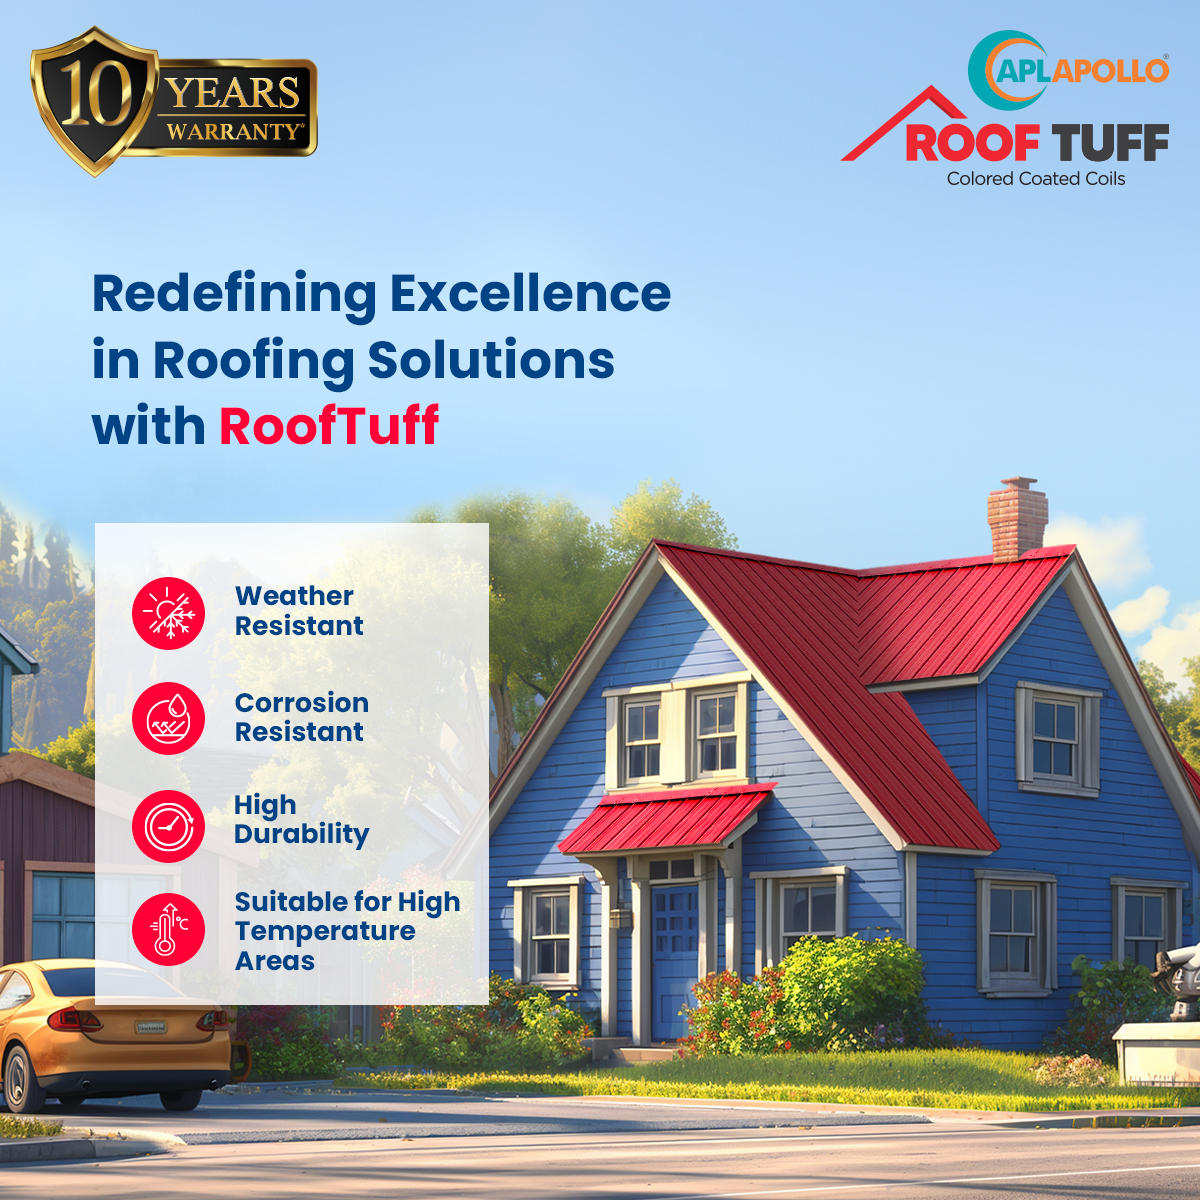 Ready to elevate your roofing game? Experience the RoofTuff advantage! From unmatched durability to superior performance, RoofTuff sets the standard for excellence in roofing solutions. Choose #APLApollo #RoofTuff and transform your home today.